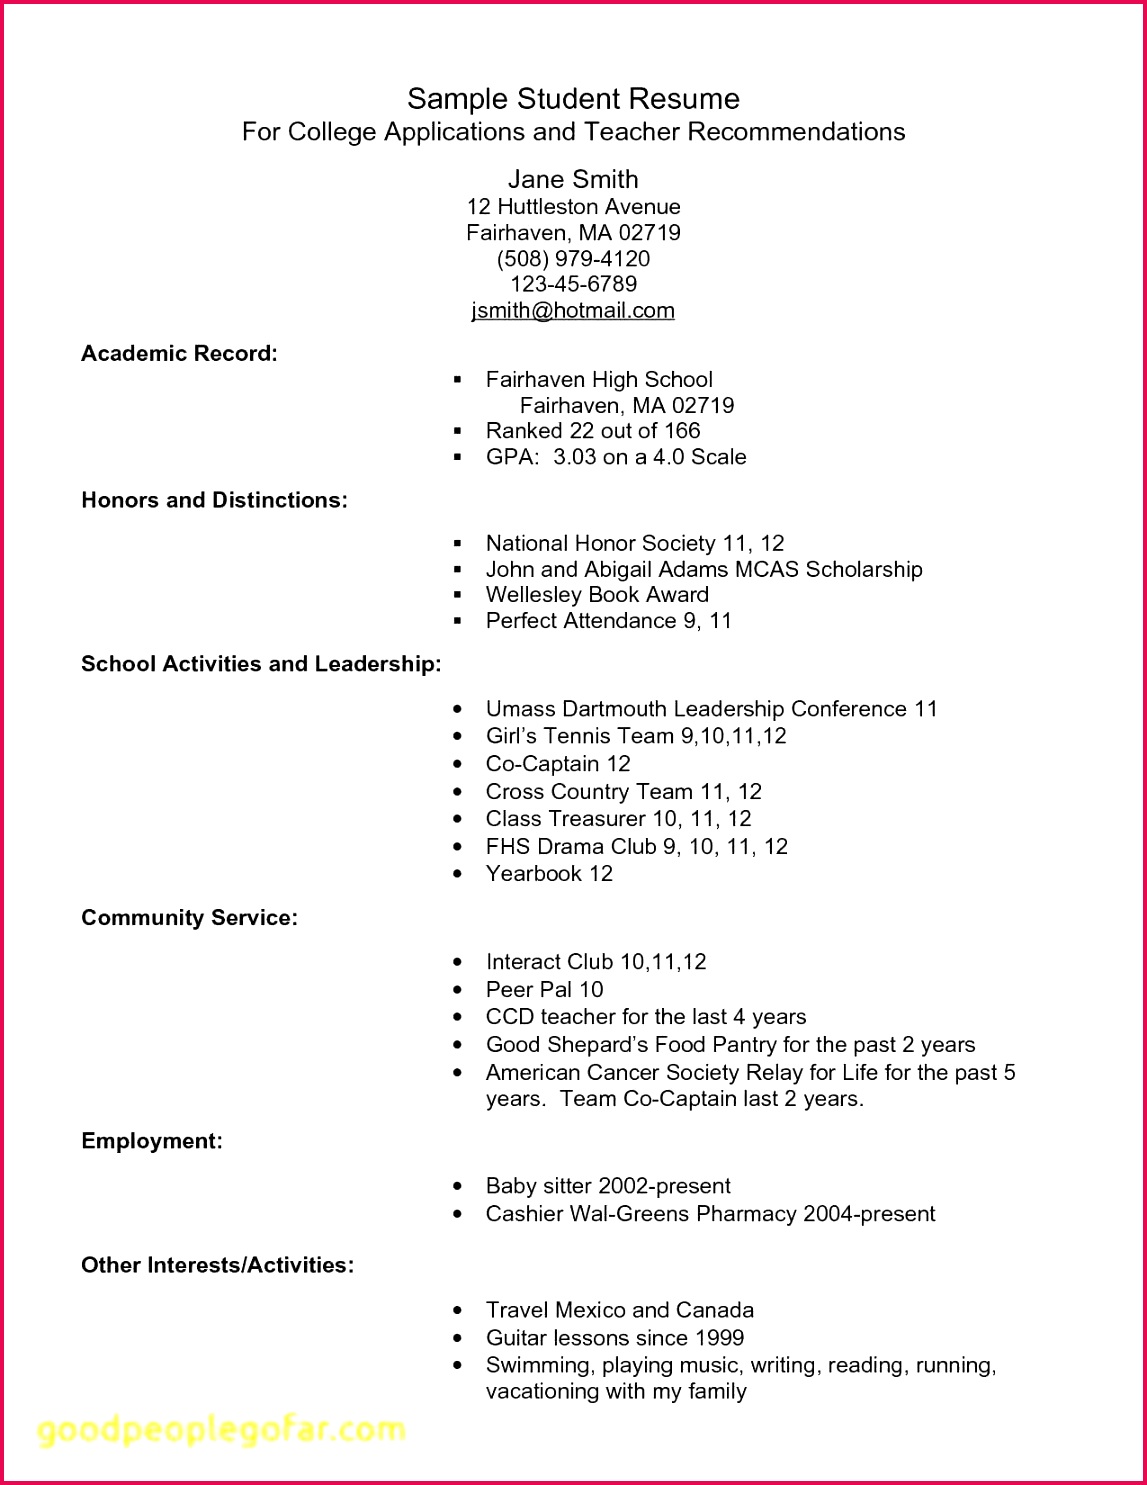 Examples Resumes Ecologist Example Teacher Resume Unique Elegant Resume for Highschool Students Excellent Resumes 0d Student